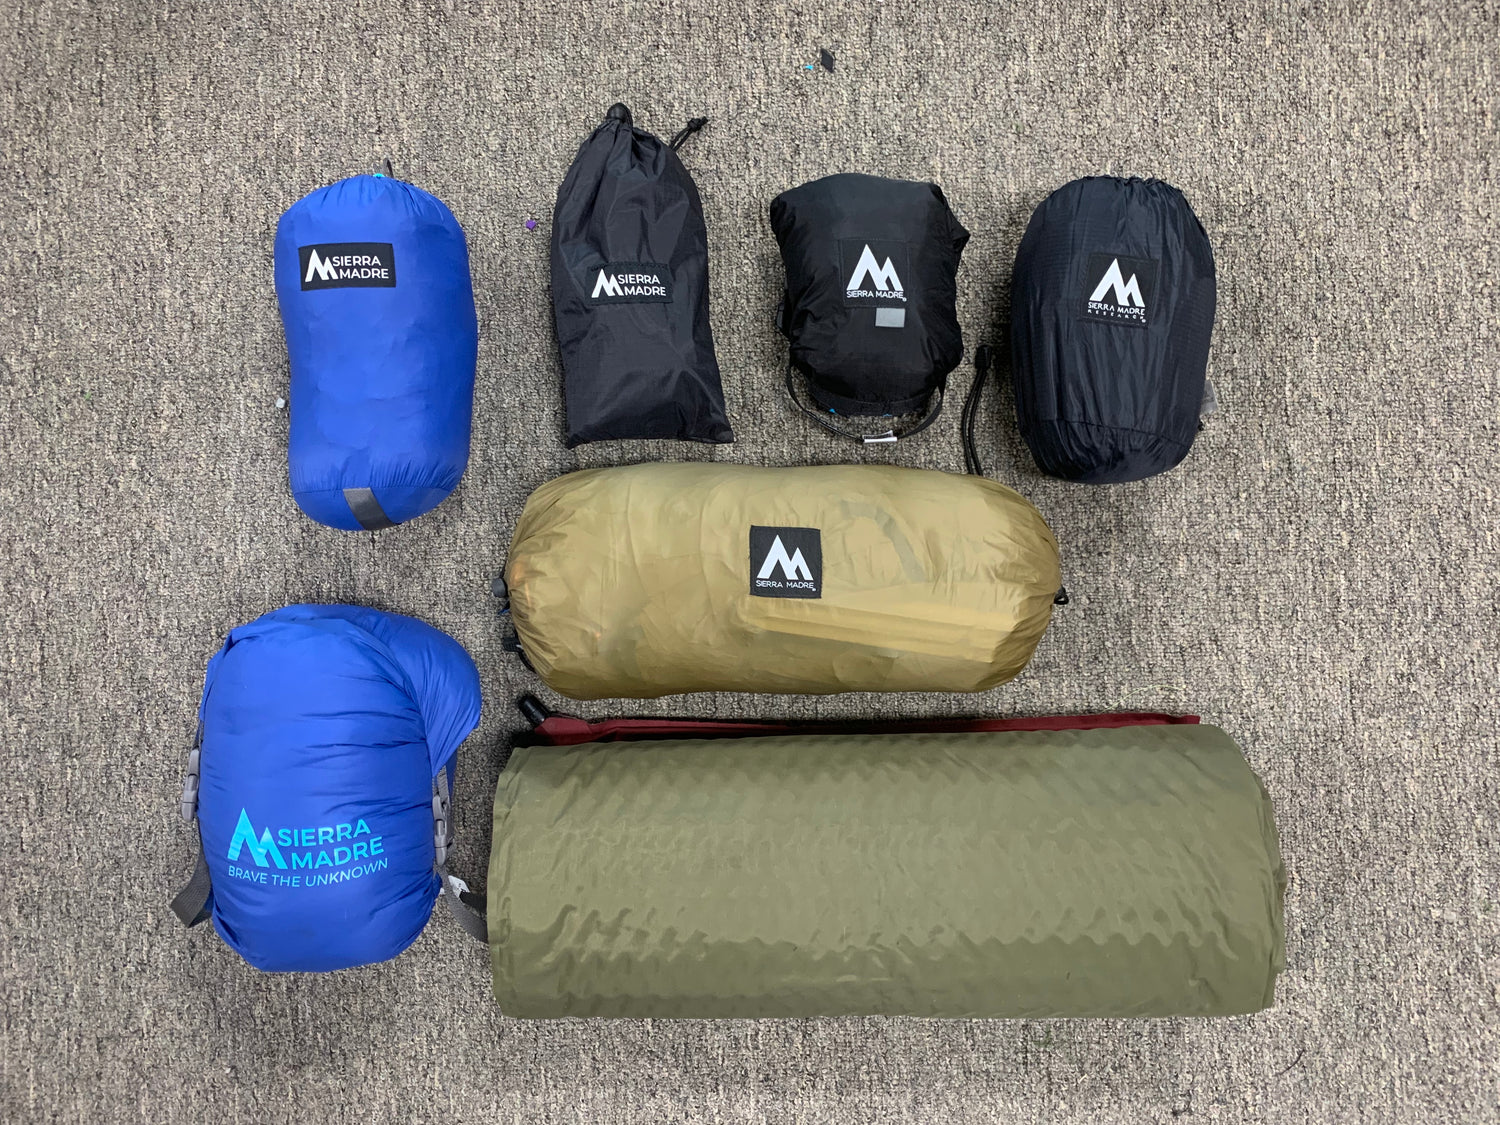 Lightweight Summer Camping: What to Pack for an Overnight Trip